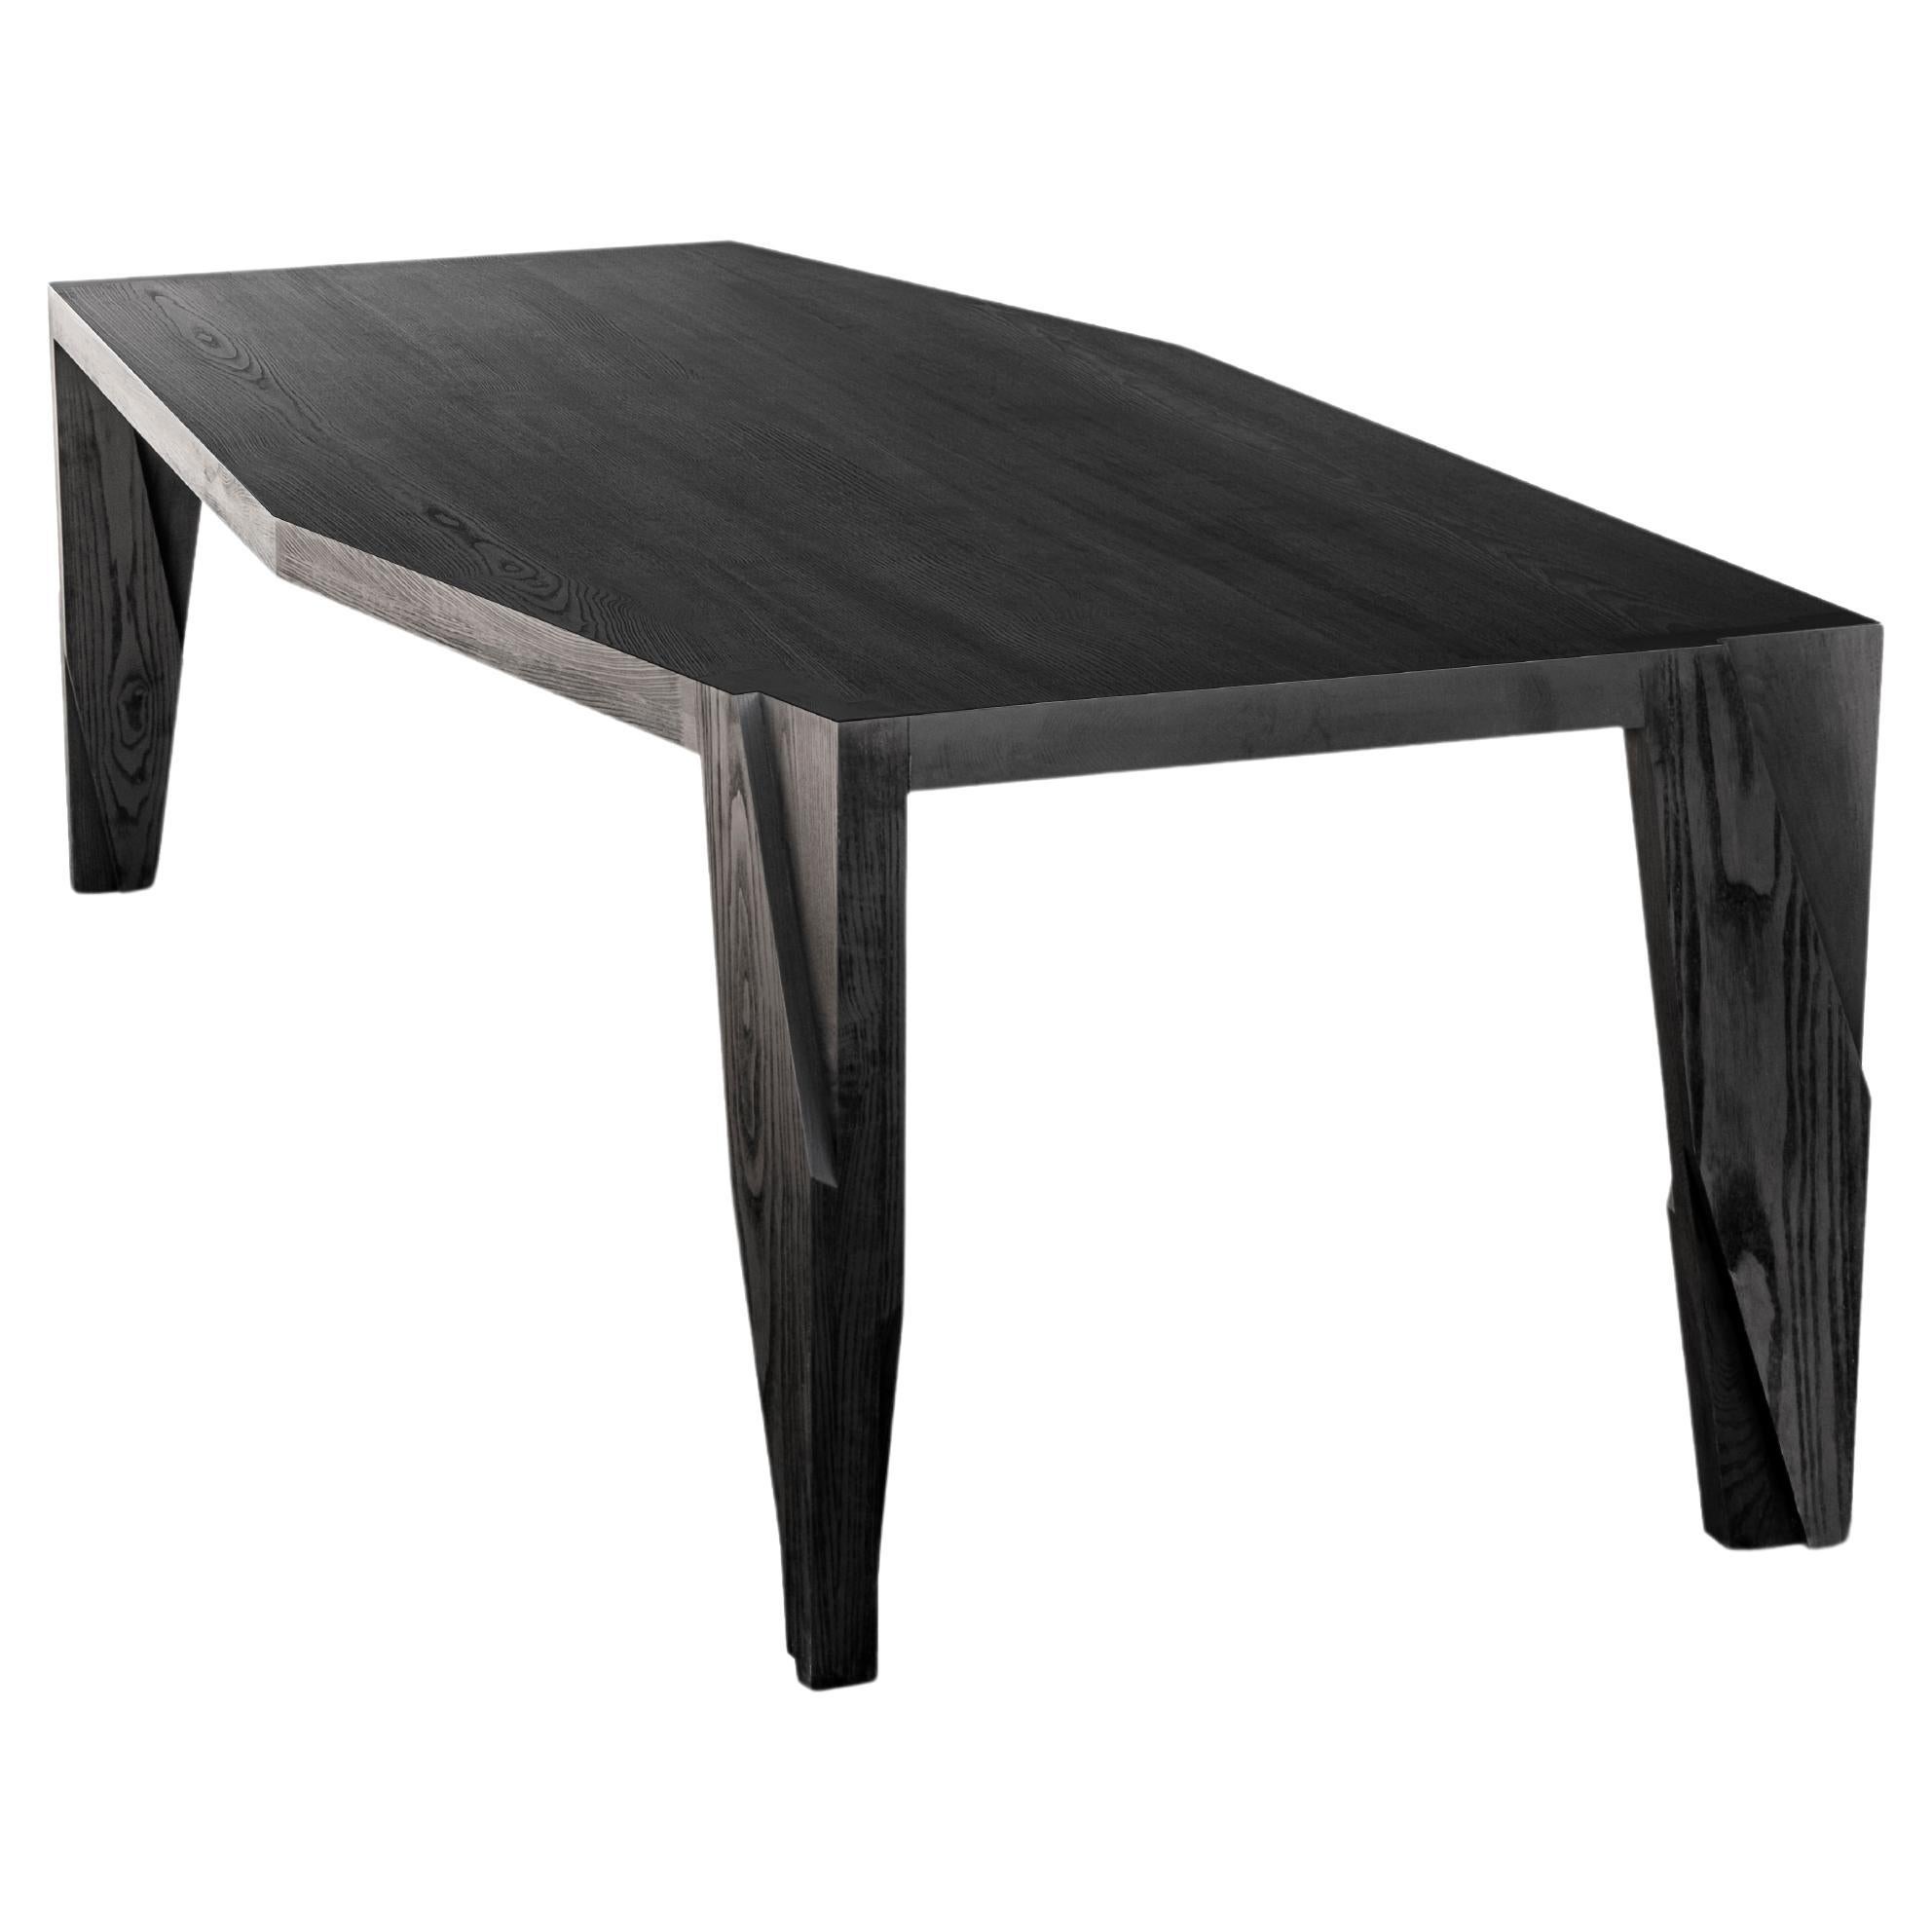 Contemporary Black Wooden 6 Seater Dining Table, Moramour by Adam Court for Okha